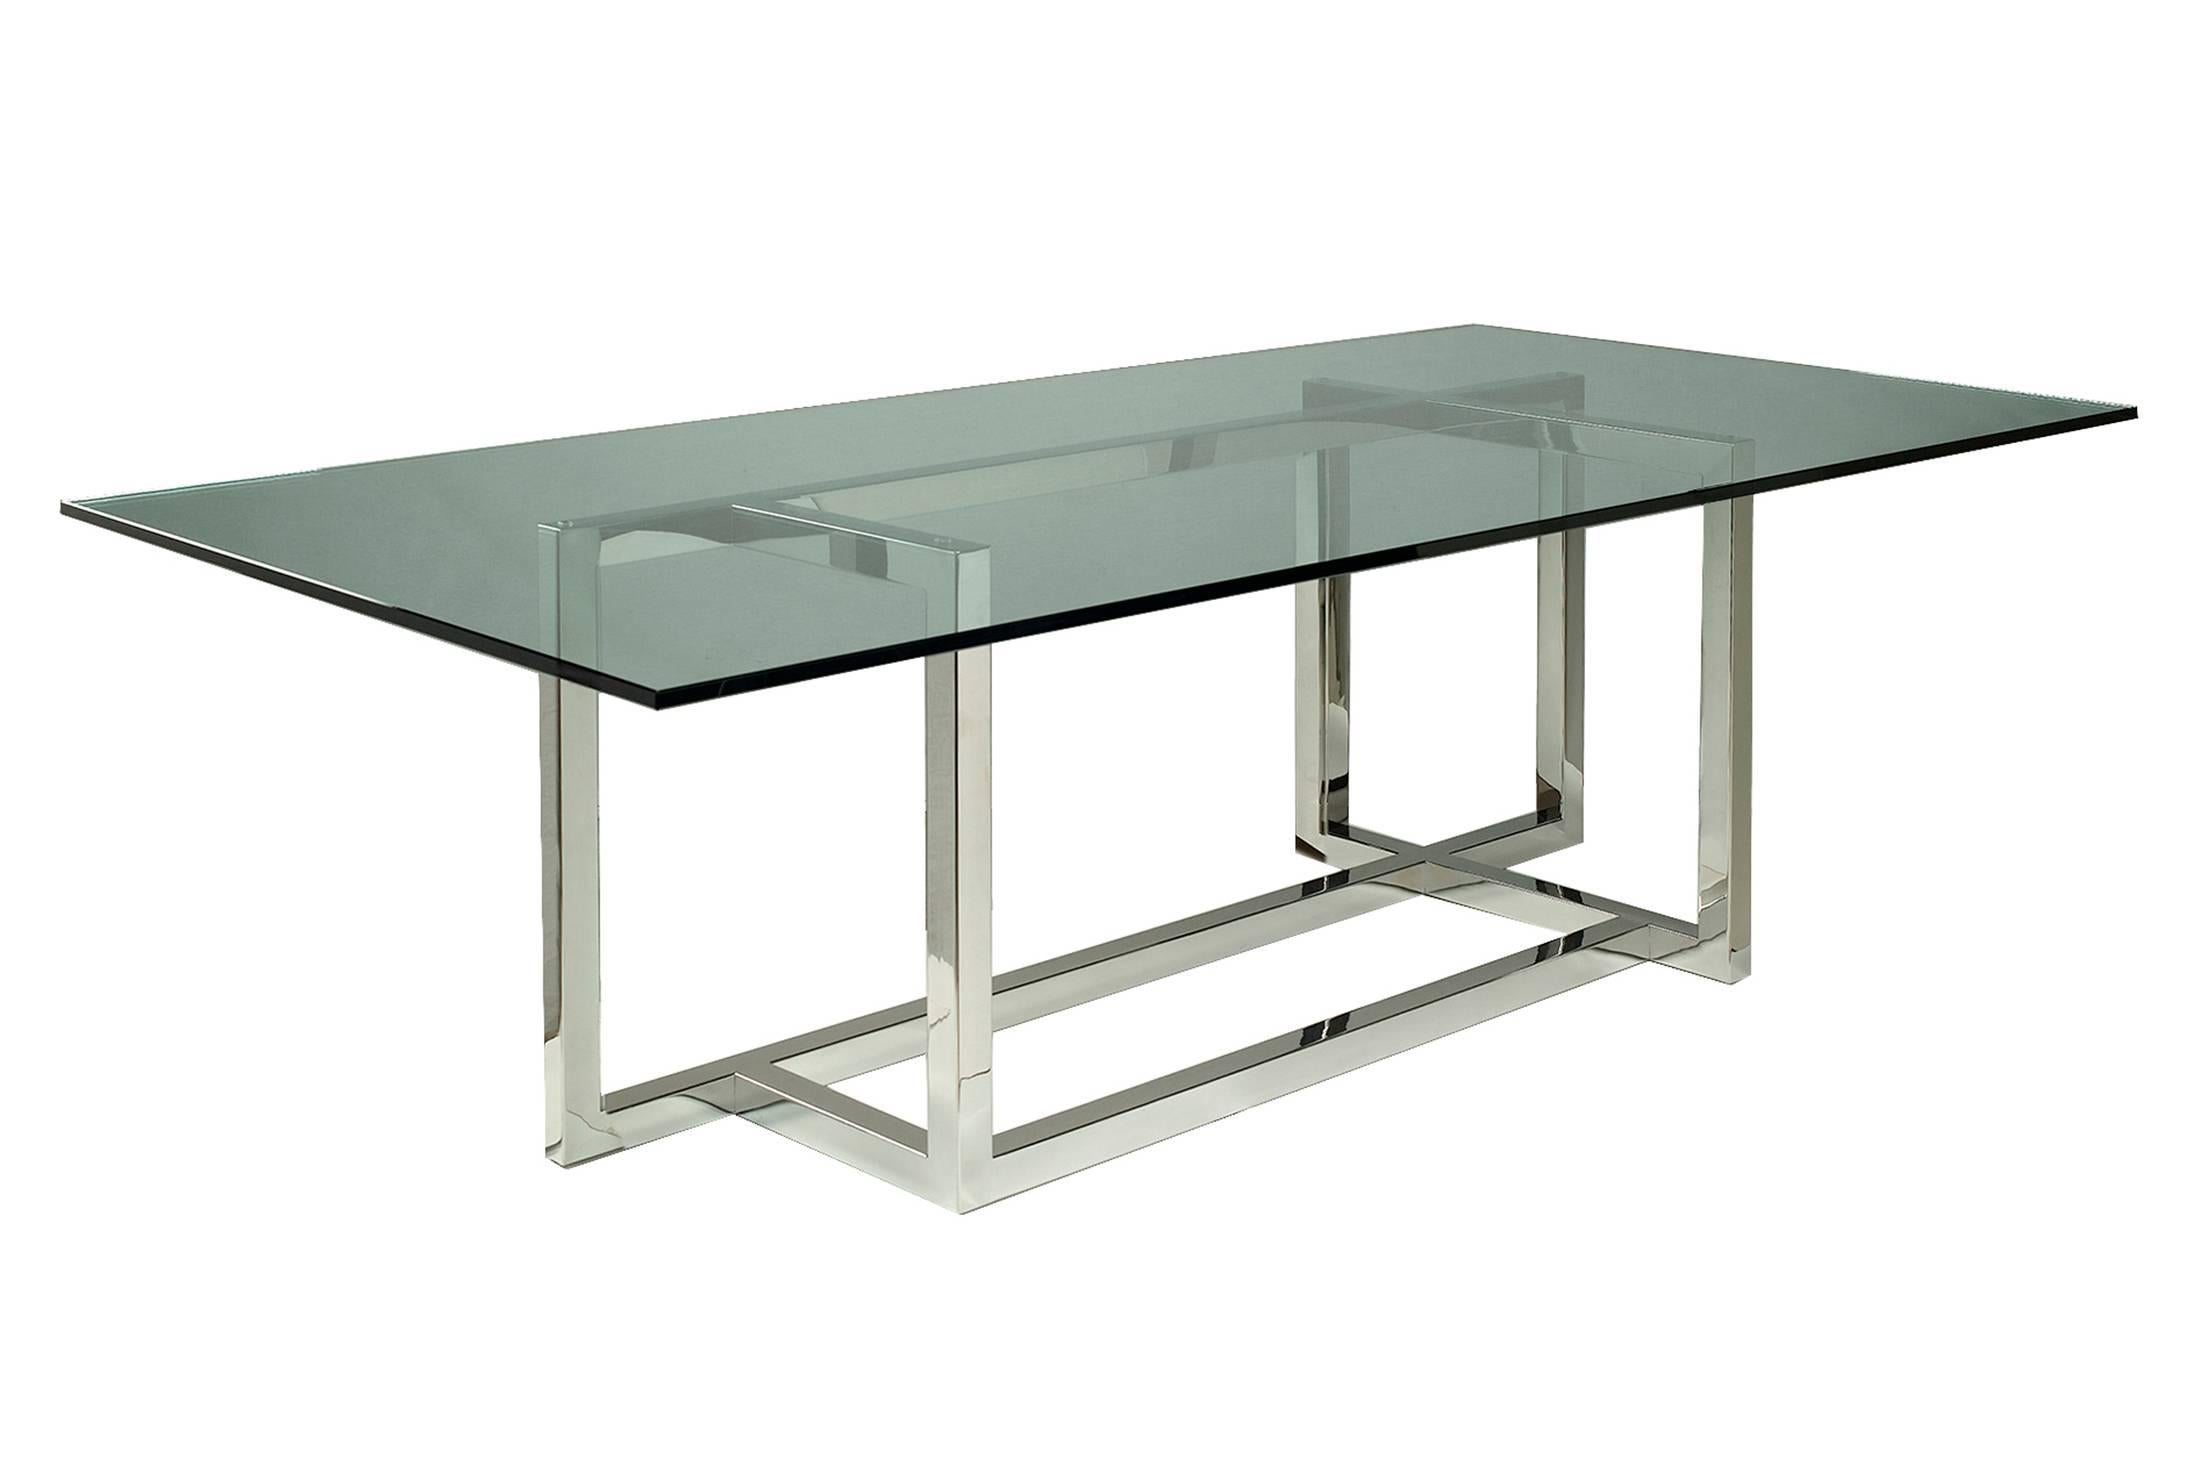 Shown in Polished Steel and Clear Glass.
Measure: 84 in x 40 in x 30 in H.

"Each Desiron piece is handcrafted in the U.S.A., fully customizable and available in a variety of finishes".